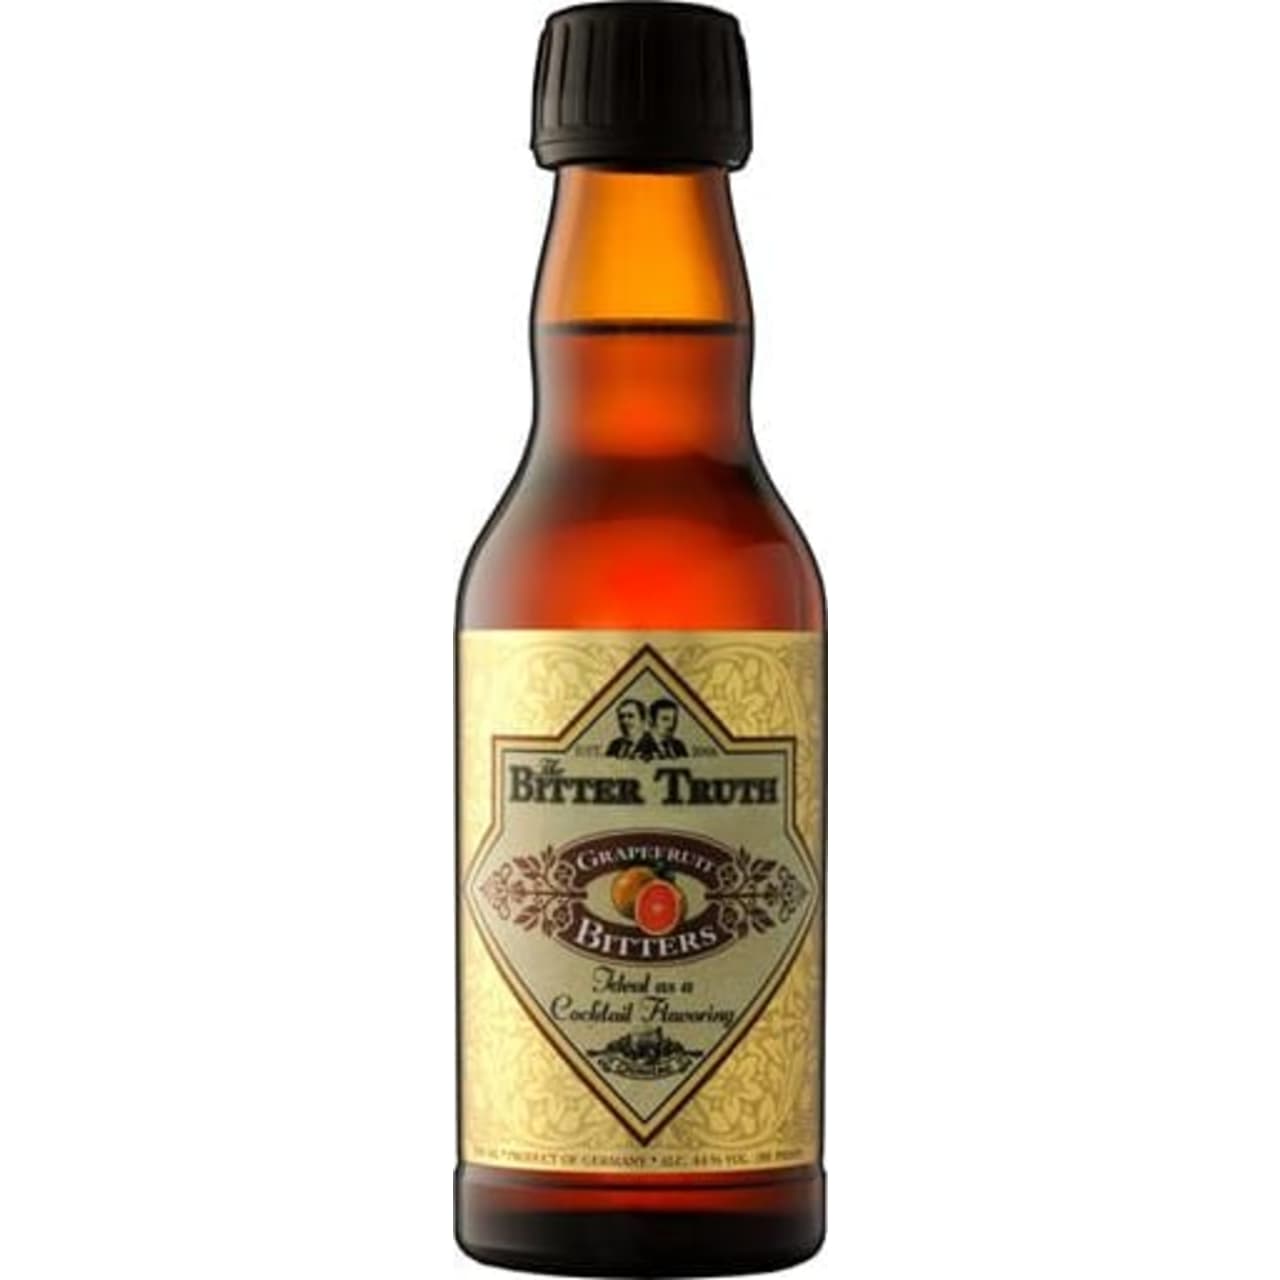 Product Image - The Bitter Truth Grapefruit Bitters